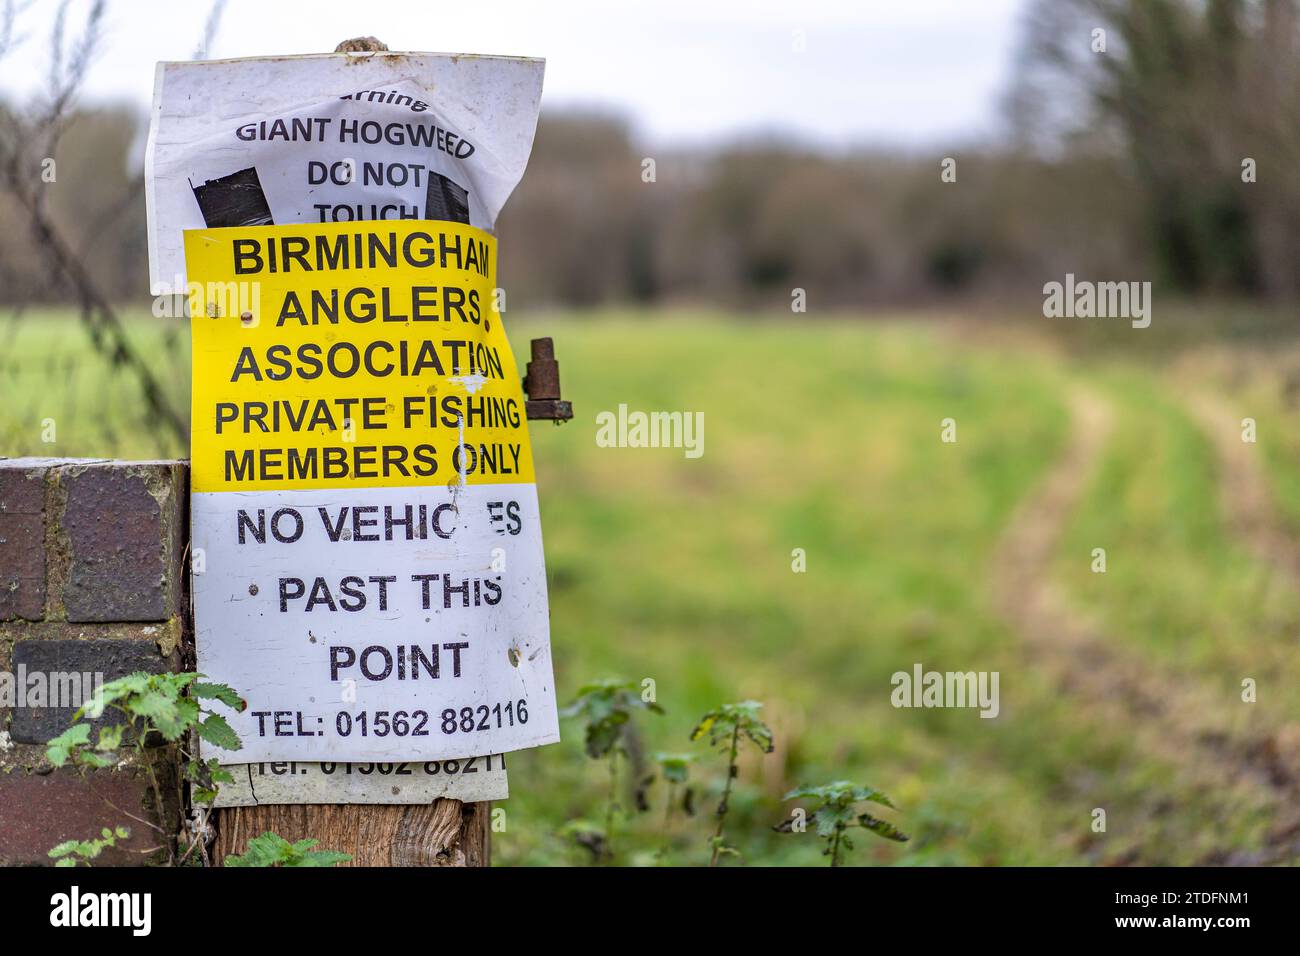 Birmingham Anglers Association fishing sign warning members of giant hogweed, do not touch. Stock Photo